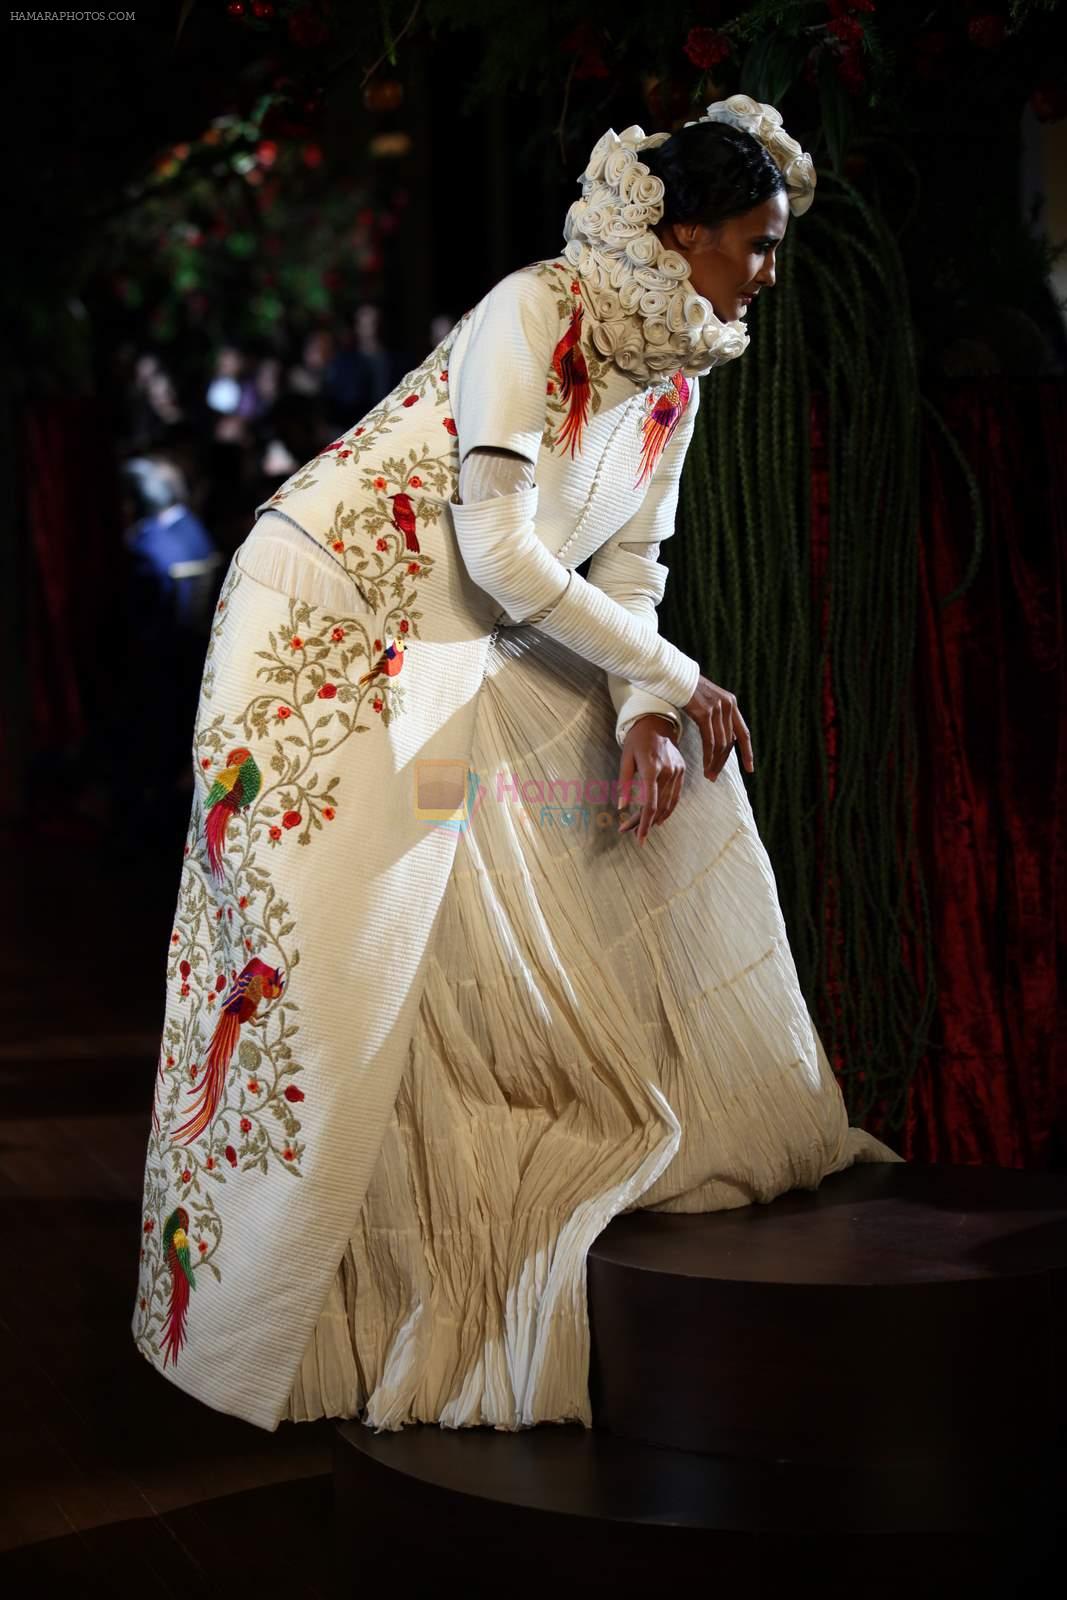 Model walk for Rohit Bal Show at India Couture Week 2015 on 1st Aug 2015